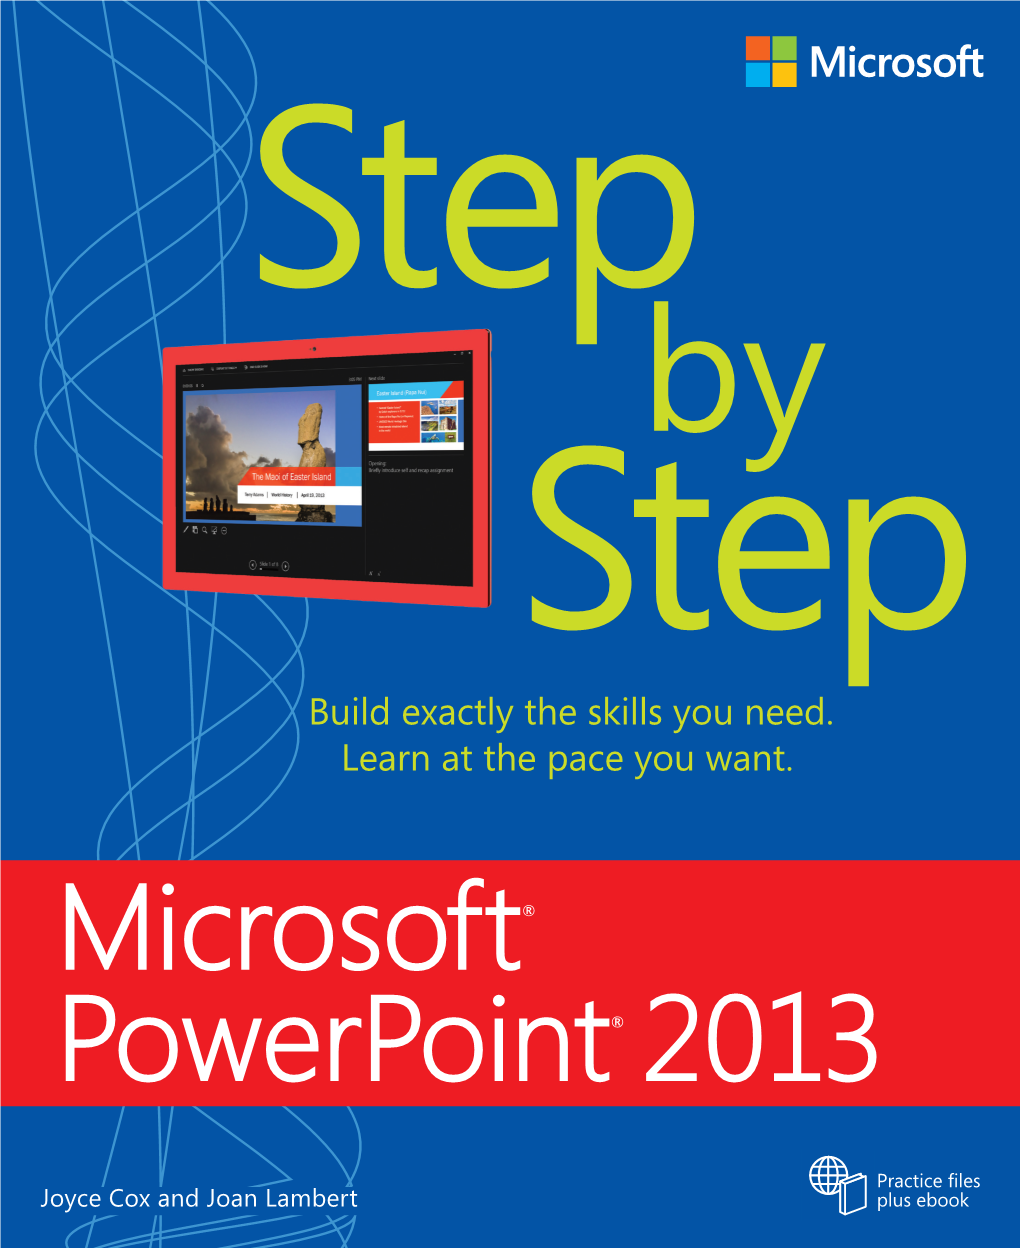 Microsoft Powerpoint 2013 Step by Step Offers a Comprehensive Look at the Features of Powerpoint That Most People Will Use Most Frequently